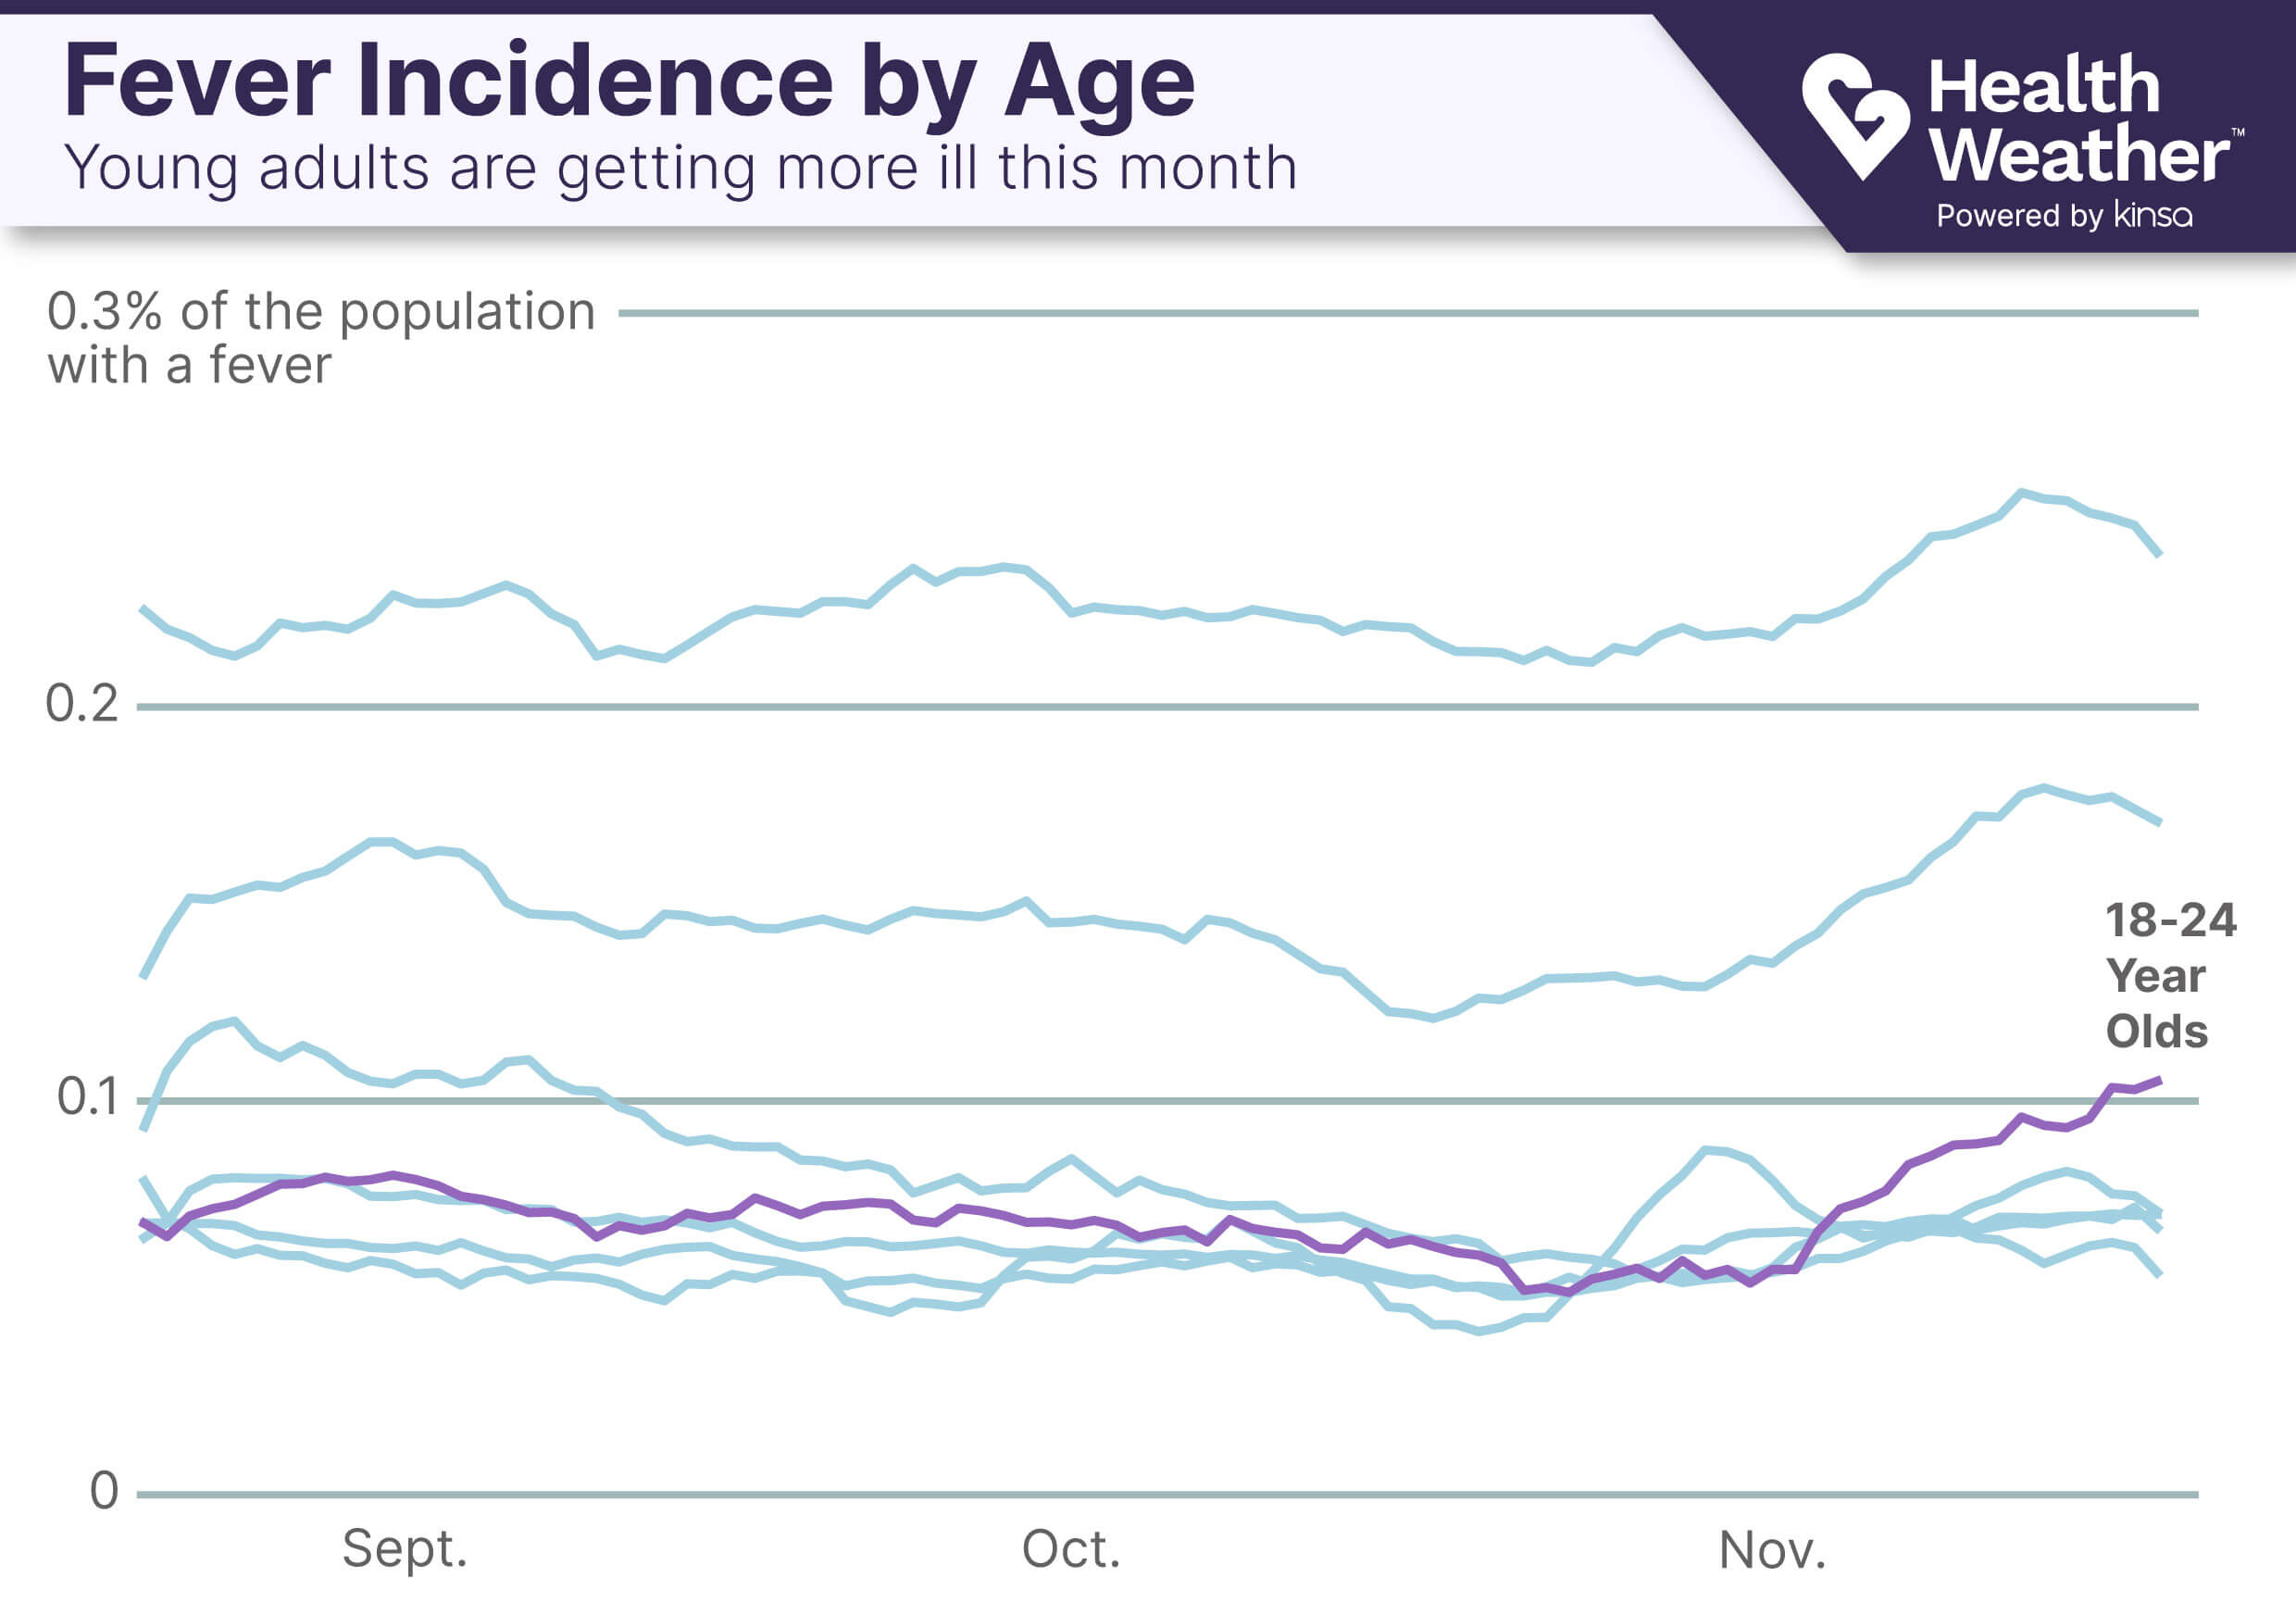 ILI by Age showing young adults 18-24 years having more fevers in November